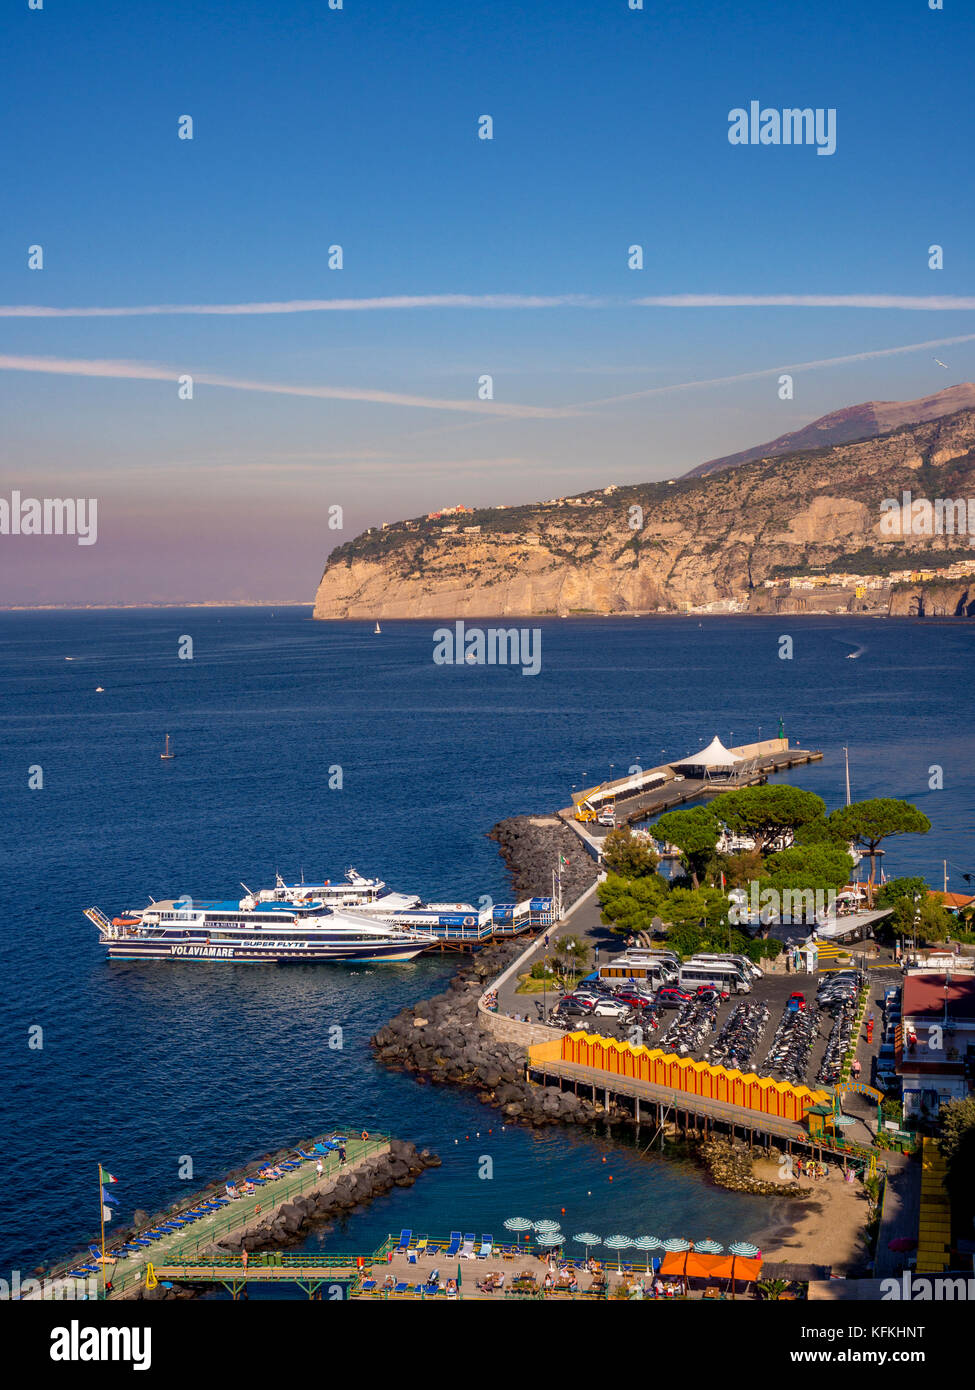 Aerial view of Pete's private beach with moored boats in the Marina Piccola. Sorrento. Italy. Stock Photo